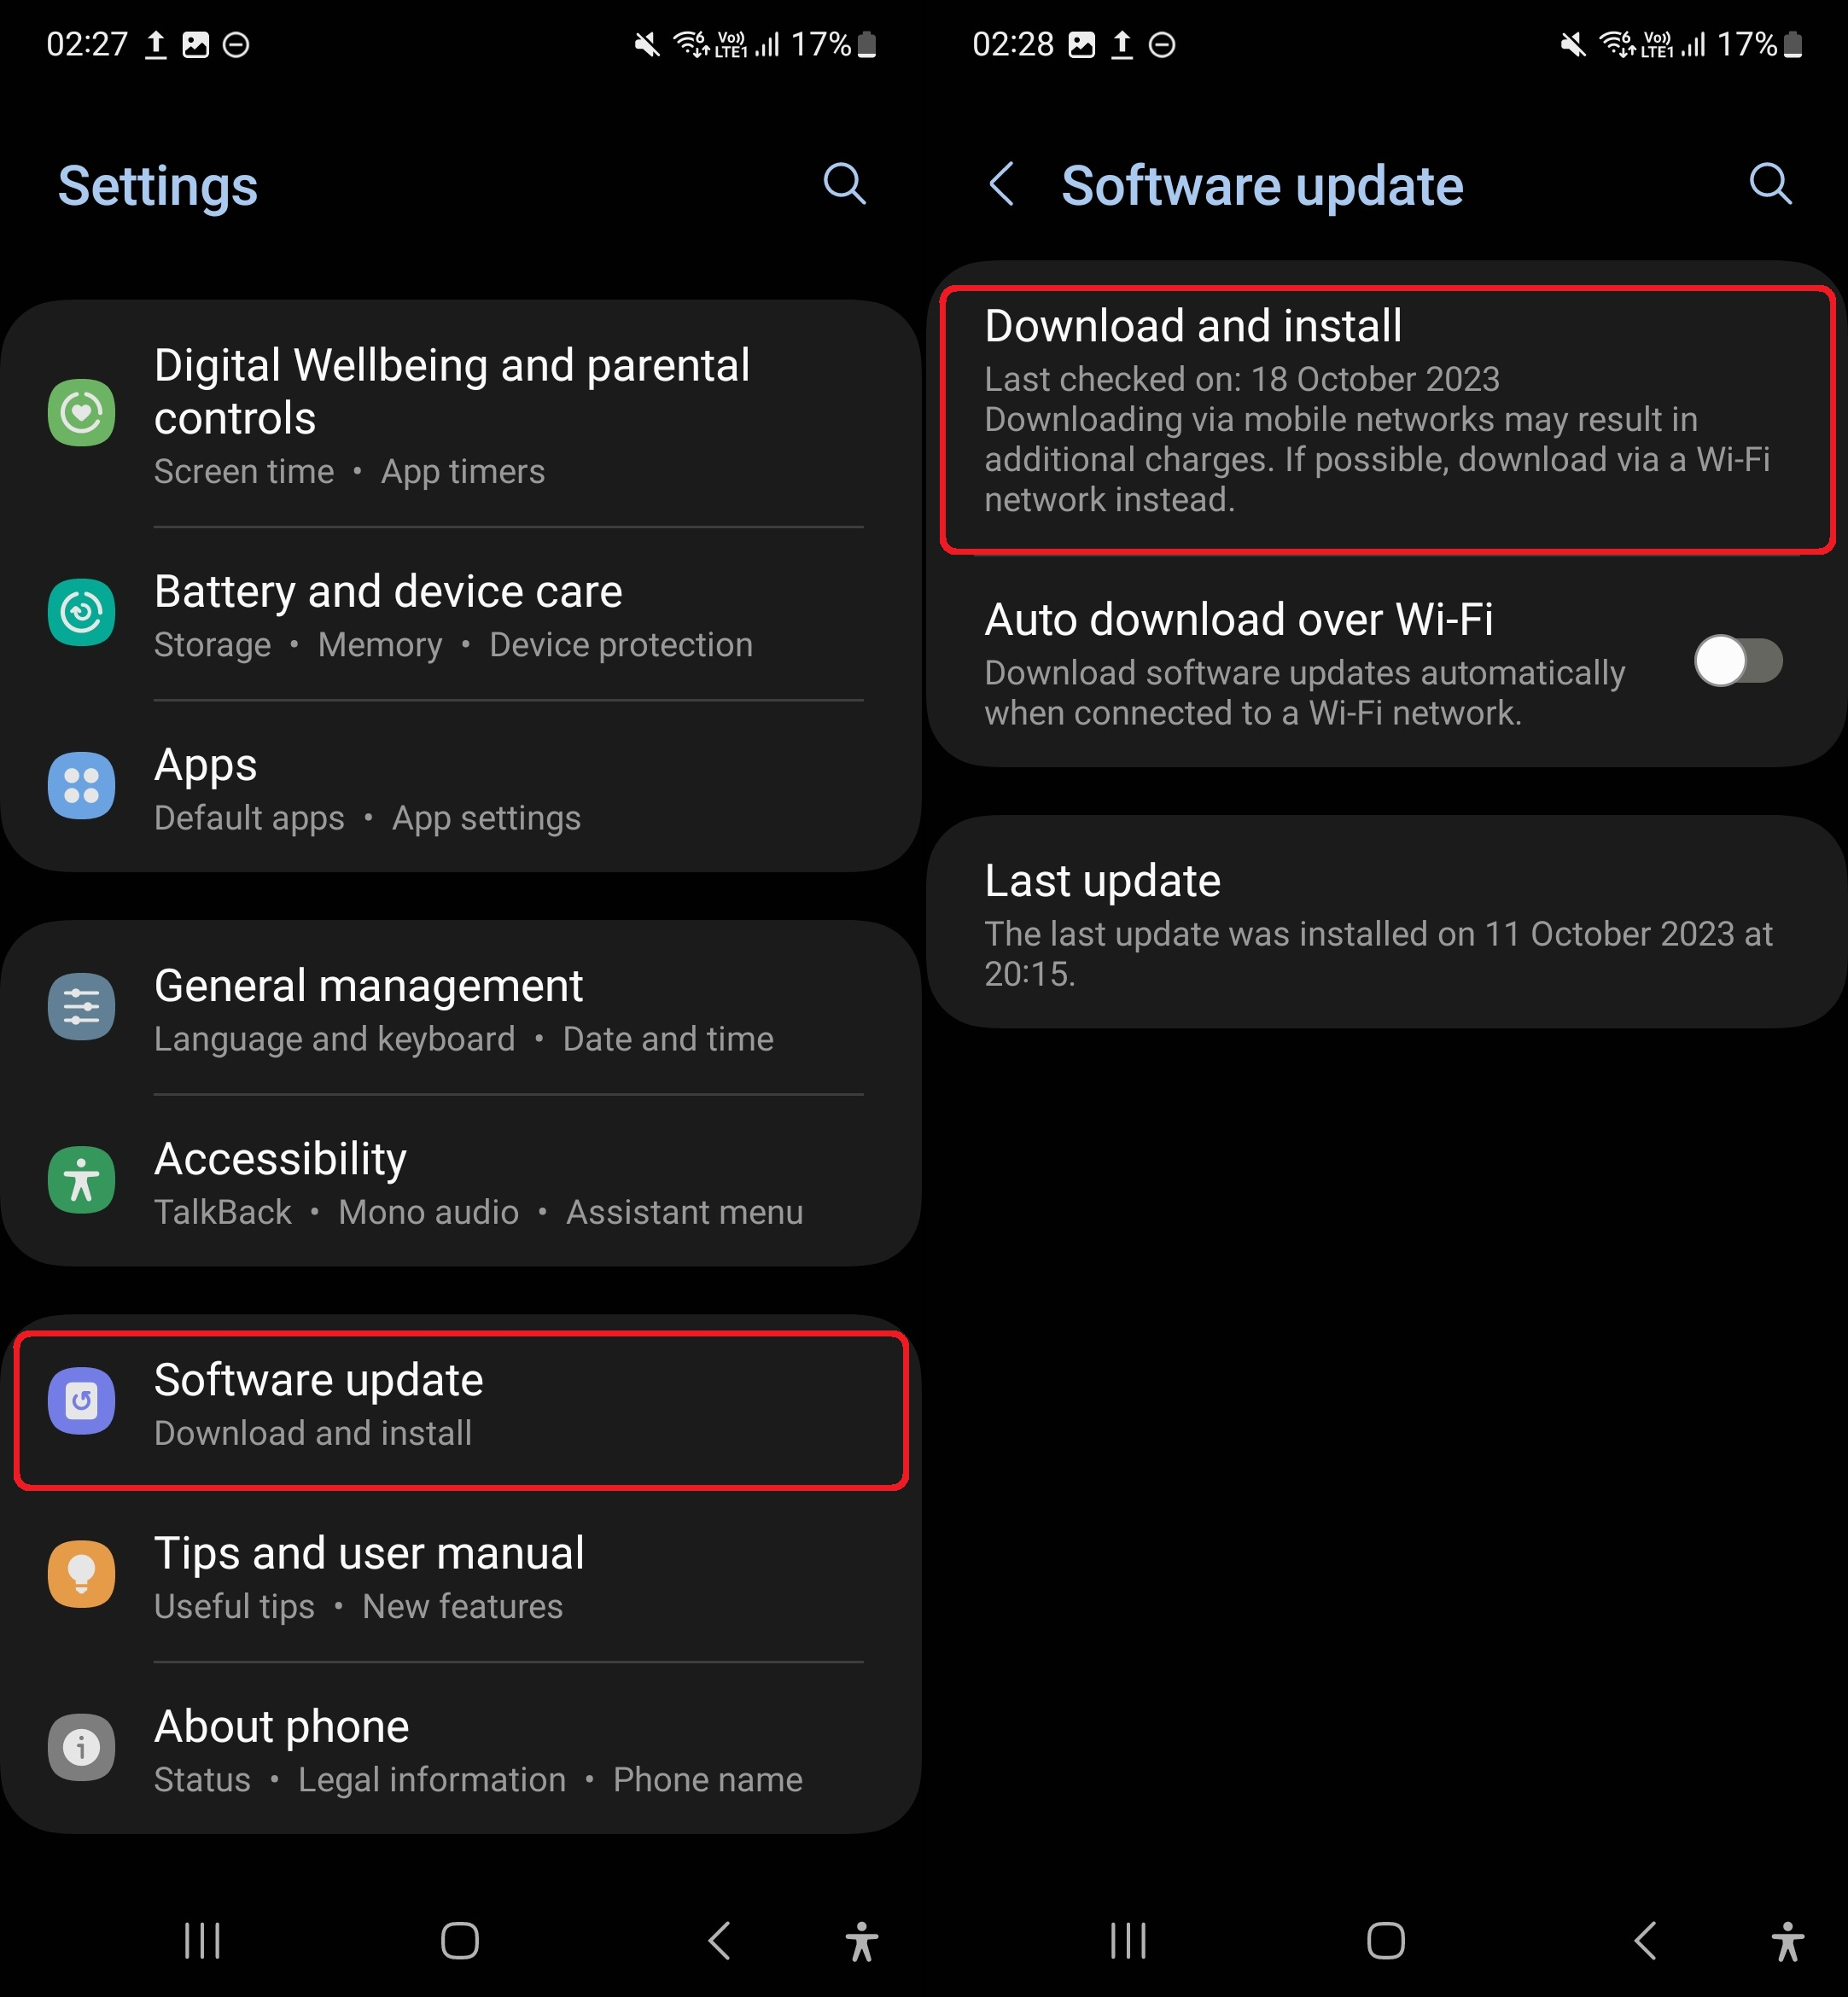 Unveiling Samsung Galaxy S20 FE: Fan Favorite Features at an Accessible  Price Point - Samsung Newsroom Global Media Library